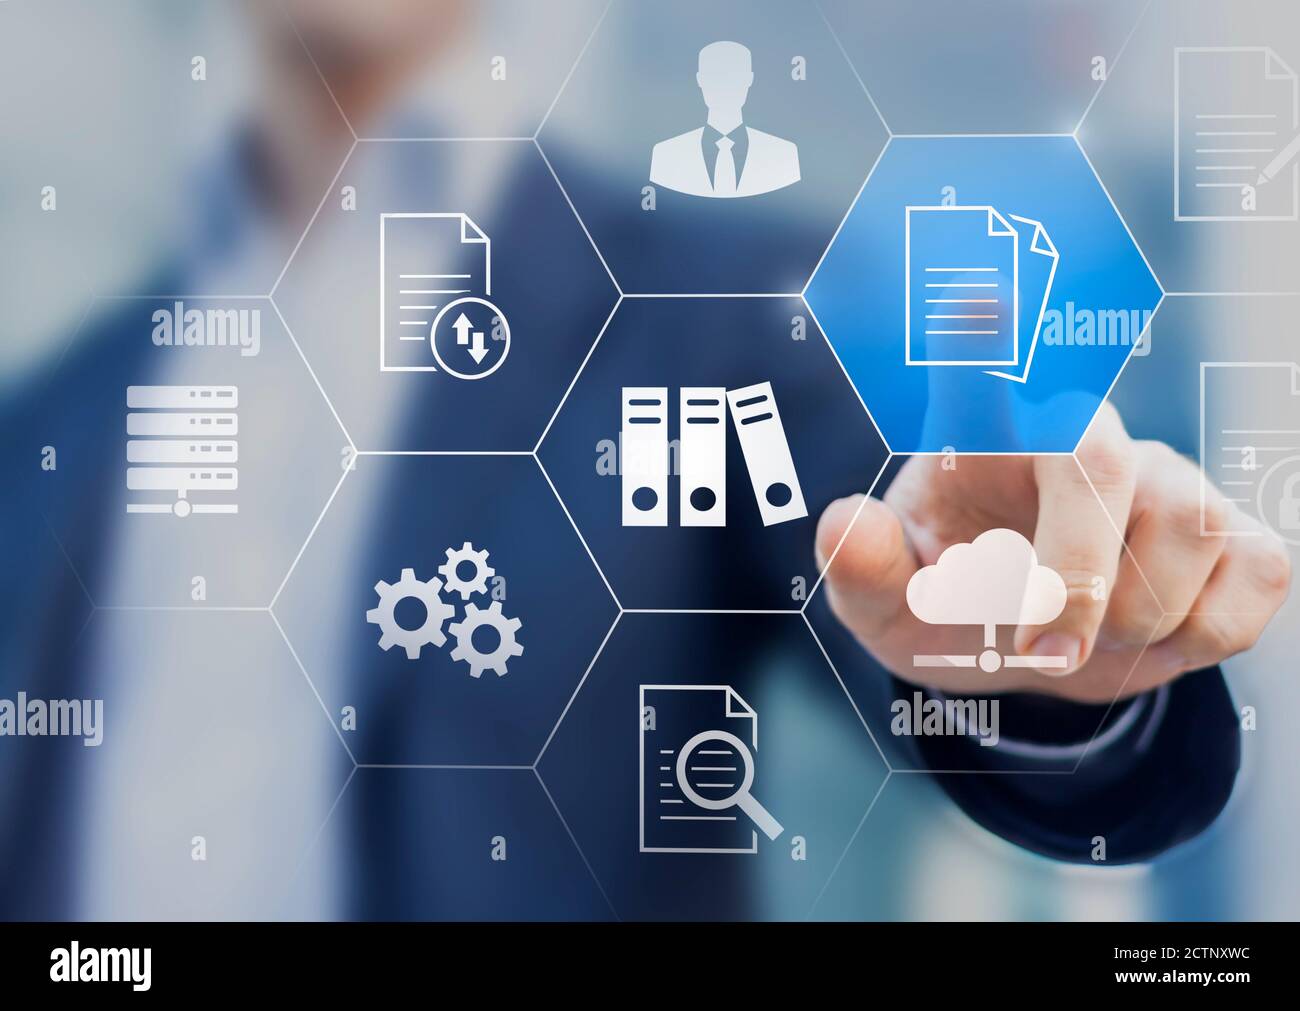 Document Management System (DMS) used to store, search and manage review process and users for corporate files and information in enterprise. Concept Stock Photo